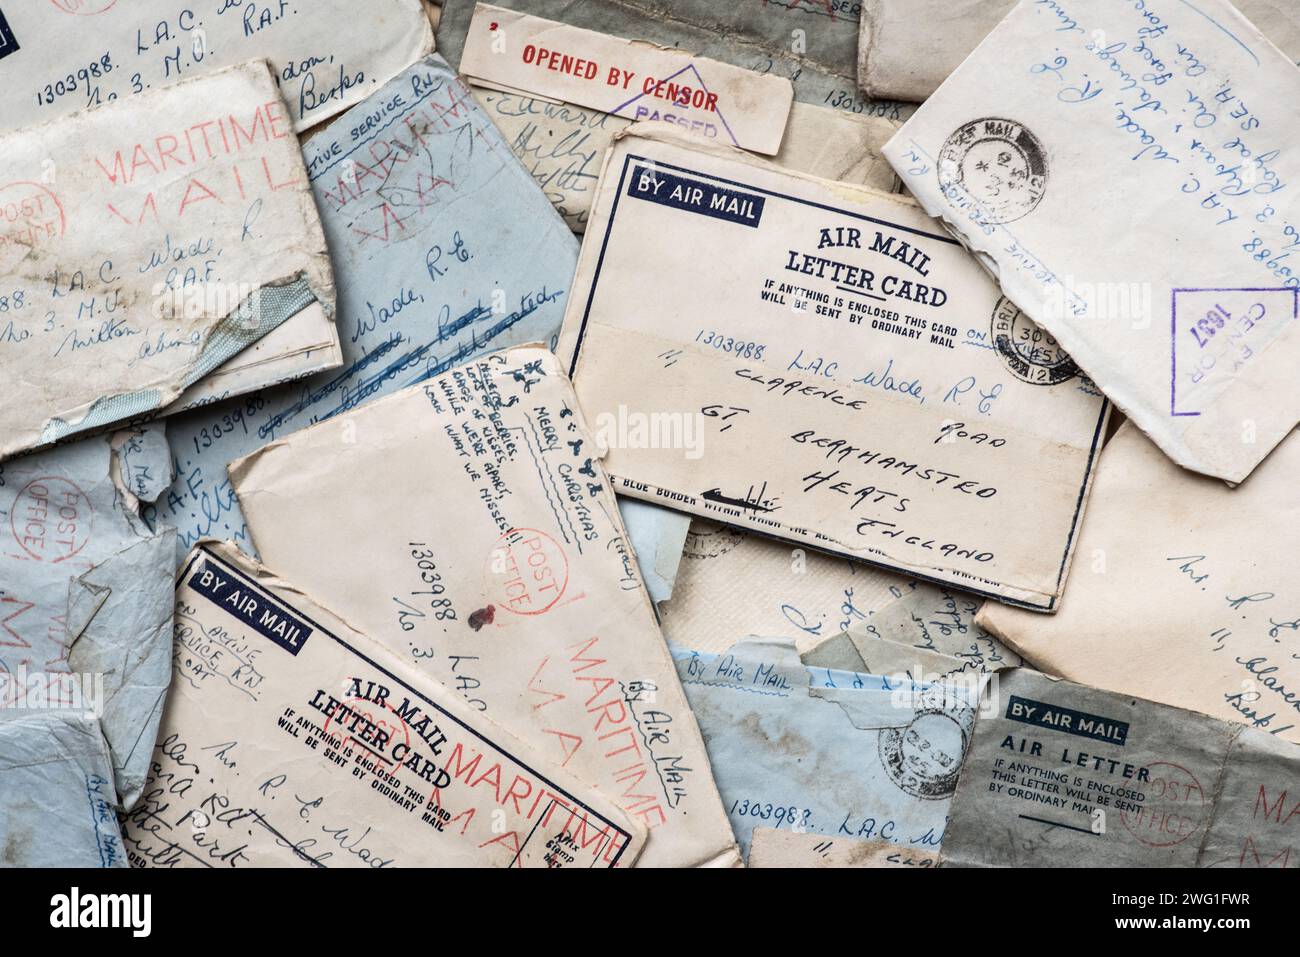 WW2 air mail letters via Maritime mail from a Wren to an RAF gentleman showing mail marks, censor etc staying in touch in hard times. Stock Photo